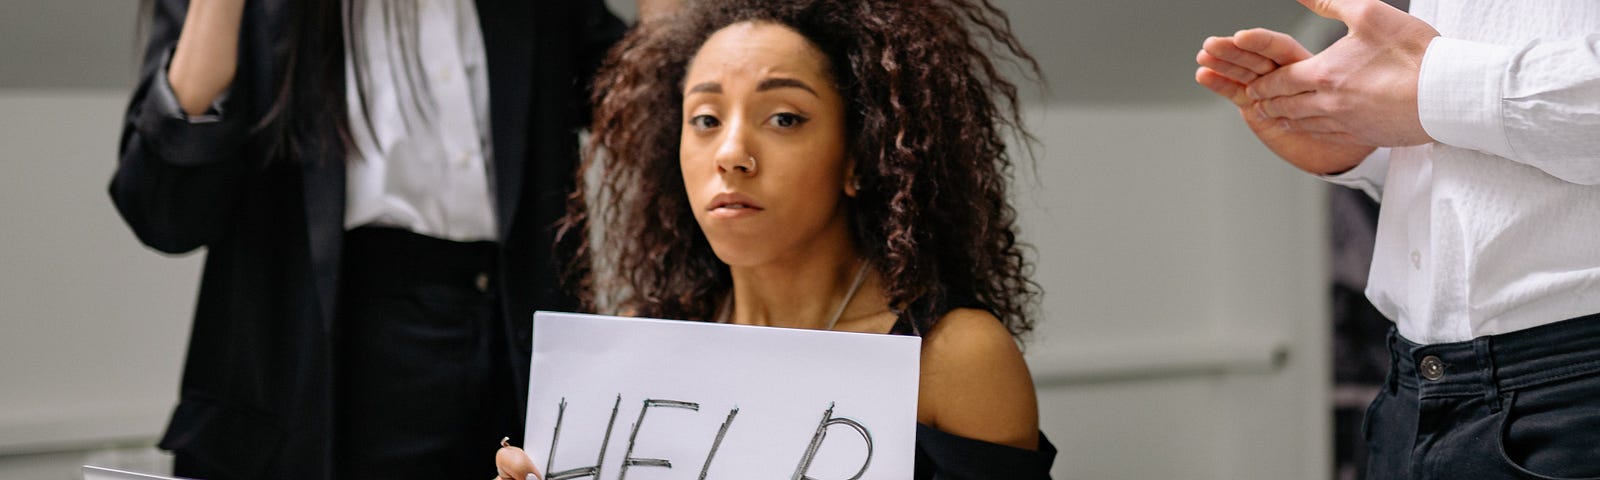 Woman holding a sign that say help.